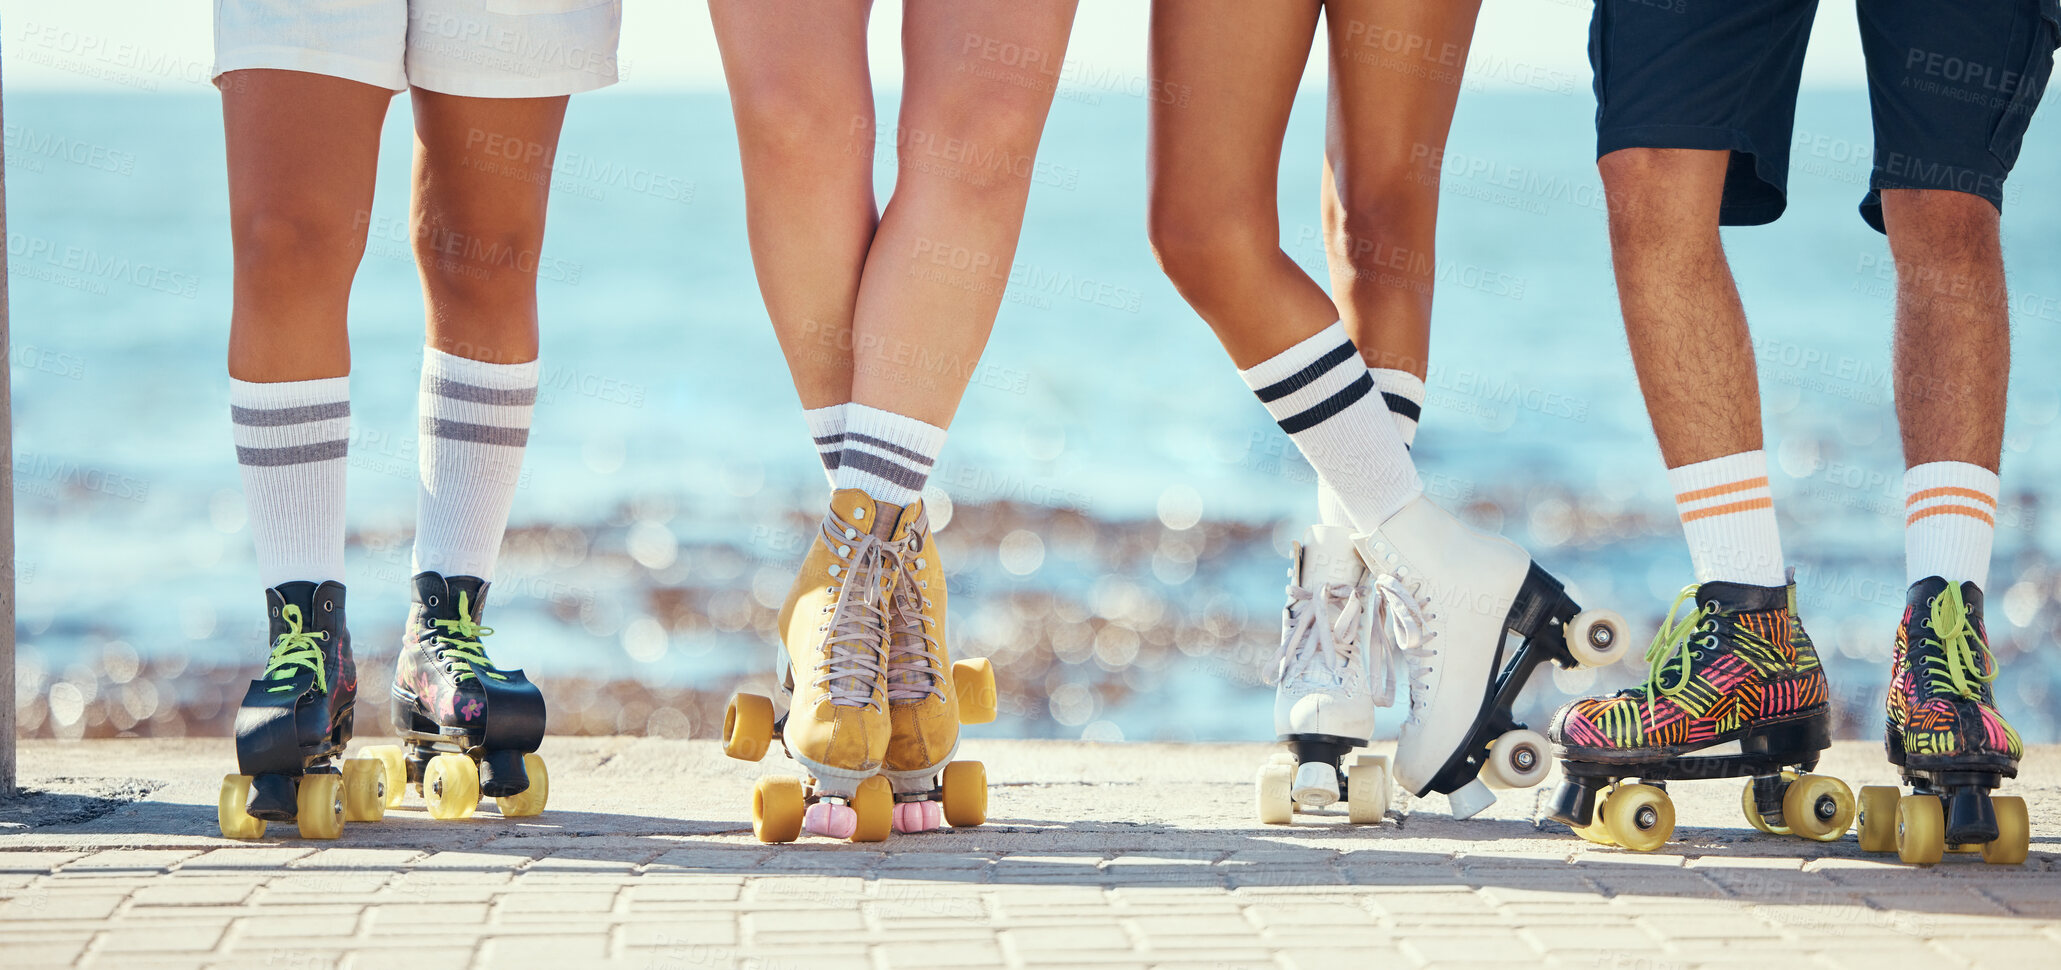 Buy stock photo Roller skates, friends and beach with a group of people on the promenade at the beach with the sea in the background. Summer, fun and lifestyle with a skaters skating outside during a sunny day